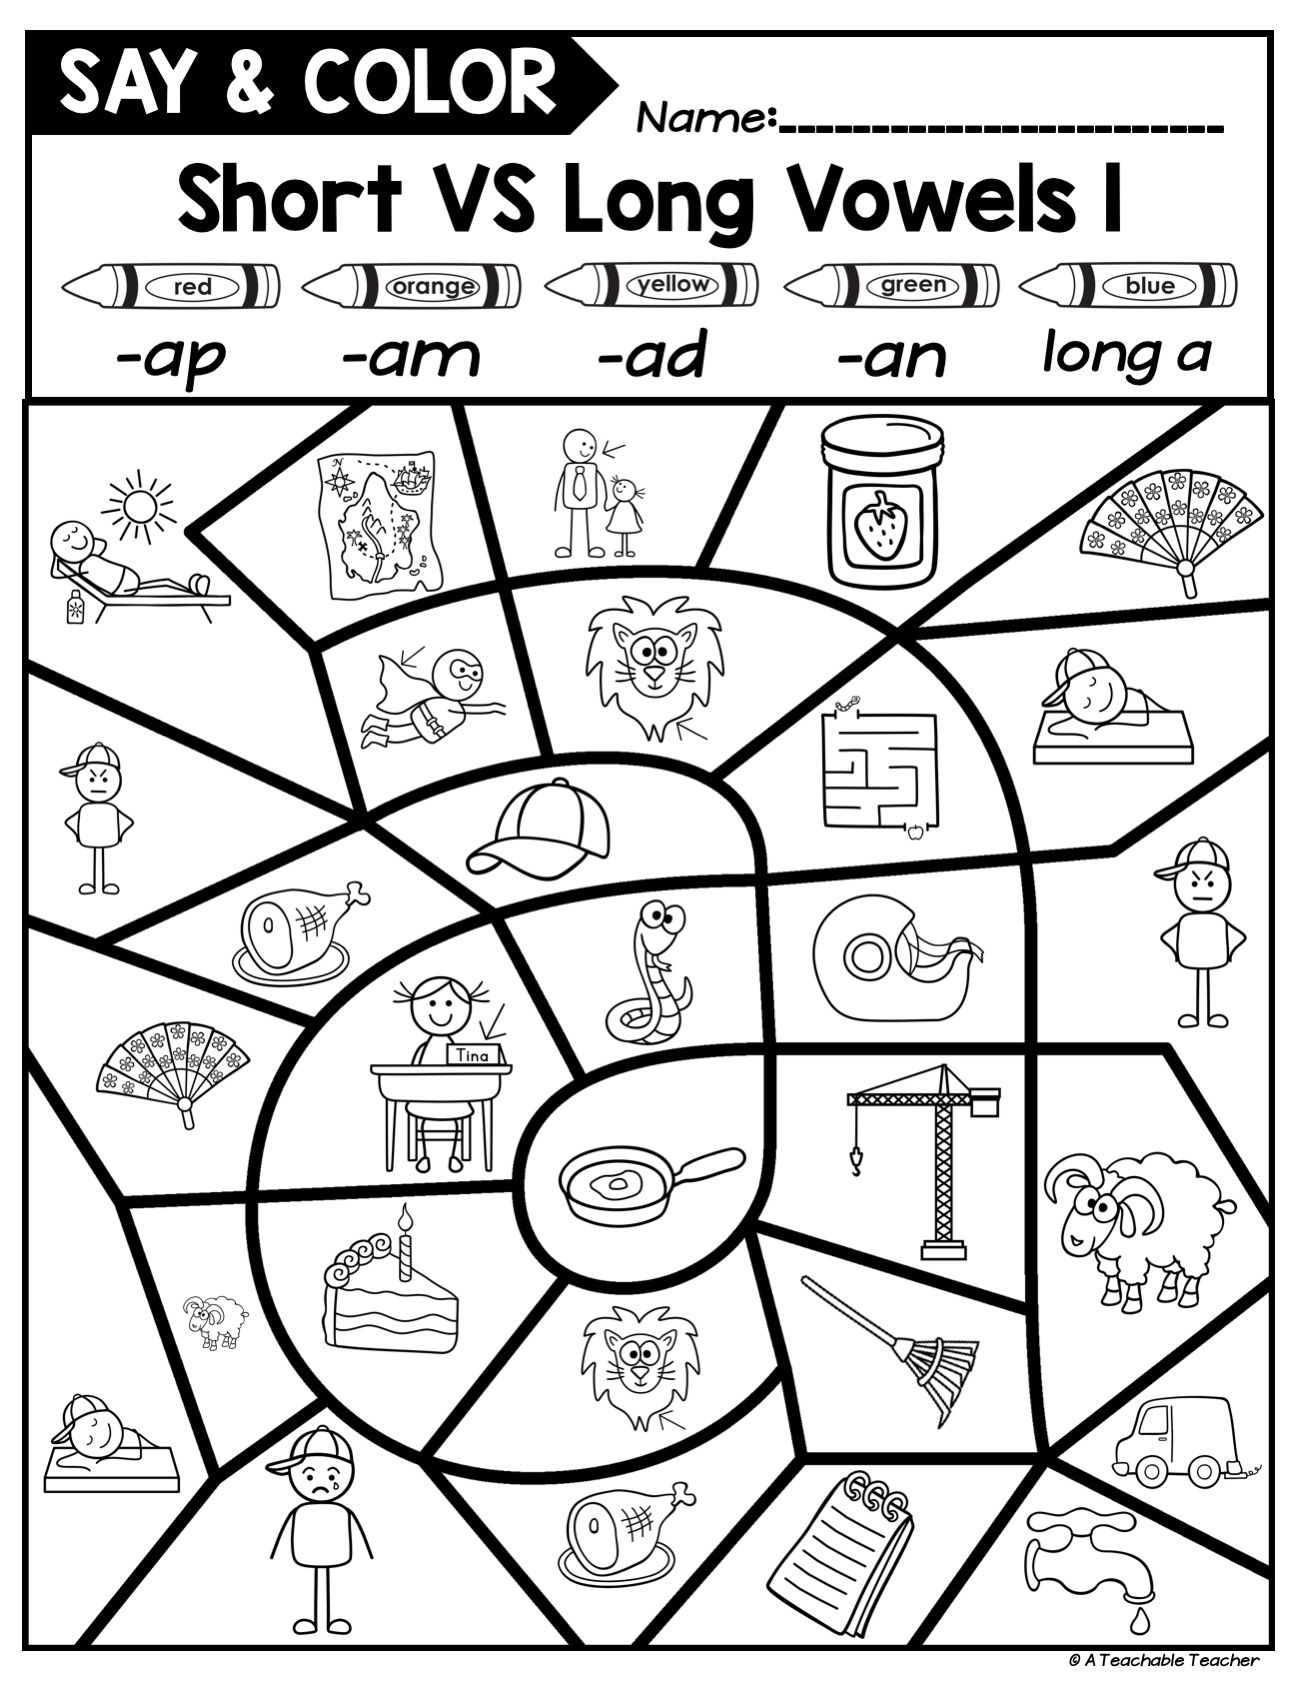 say and color short vs long vowels cvc and cvce words